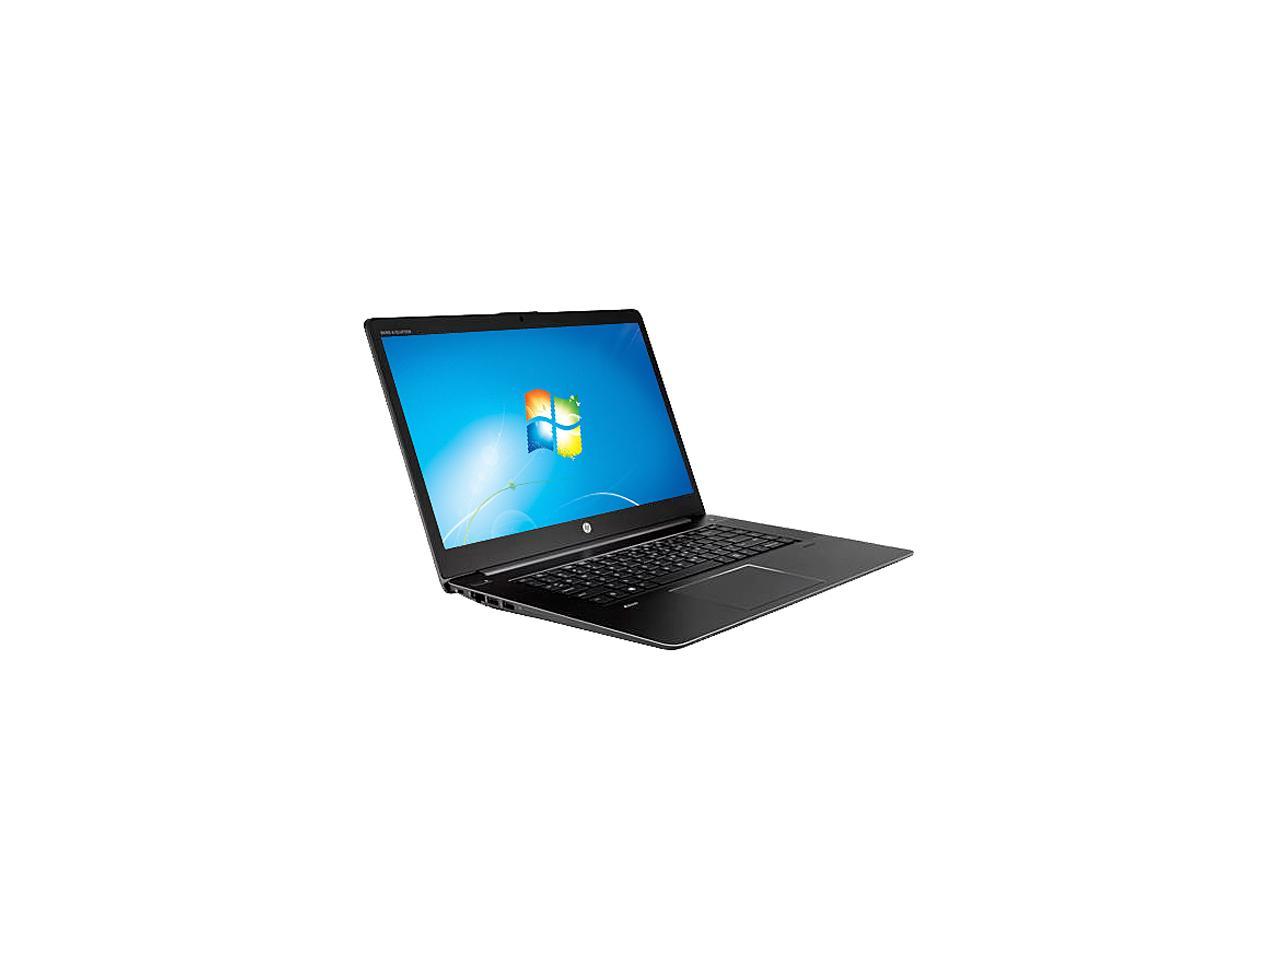 HP ZBook Studio G3 15.6" (In-plane Switching (IPS) Technology) Mobile Workstation - Intel Core i5 (6th Gen) i5-6300HQ Quad-core (4 Core) 2.30 GHz - Space Silver